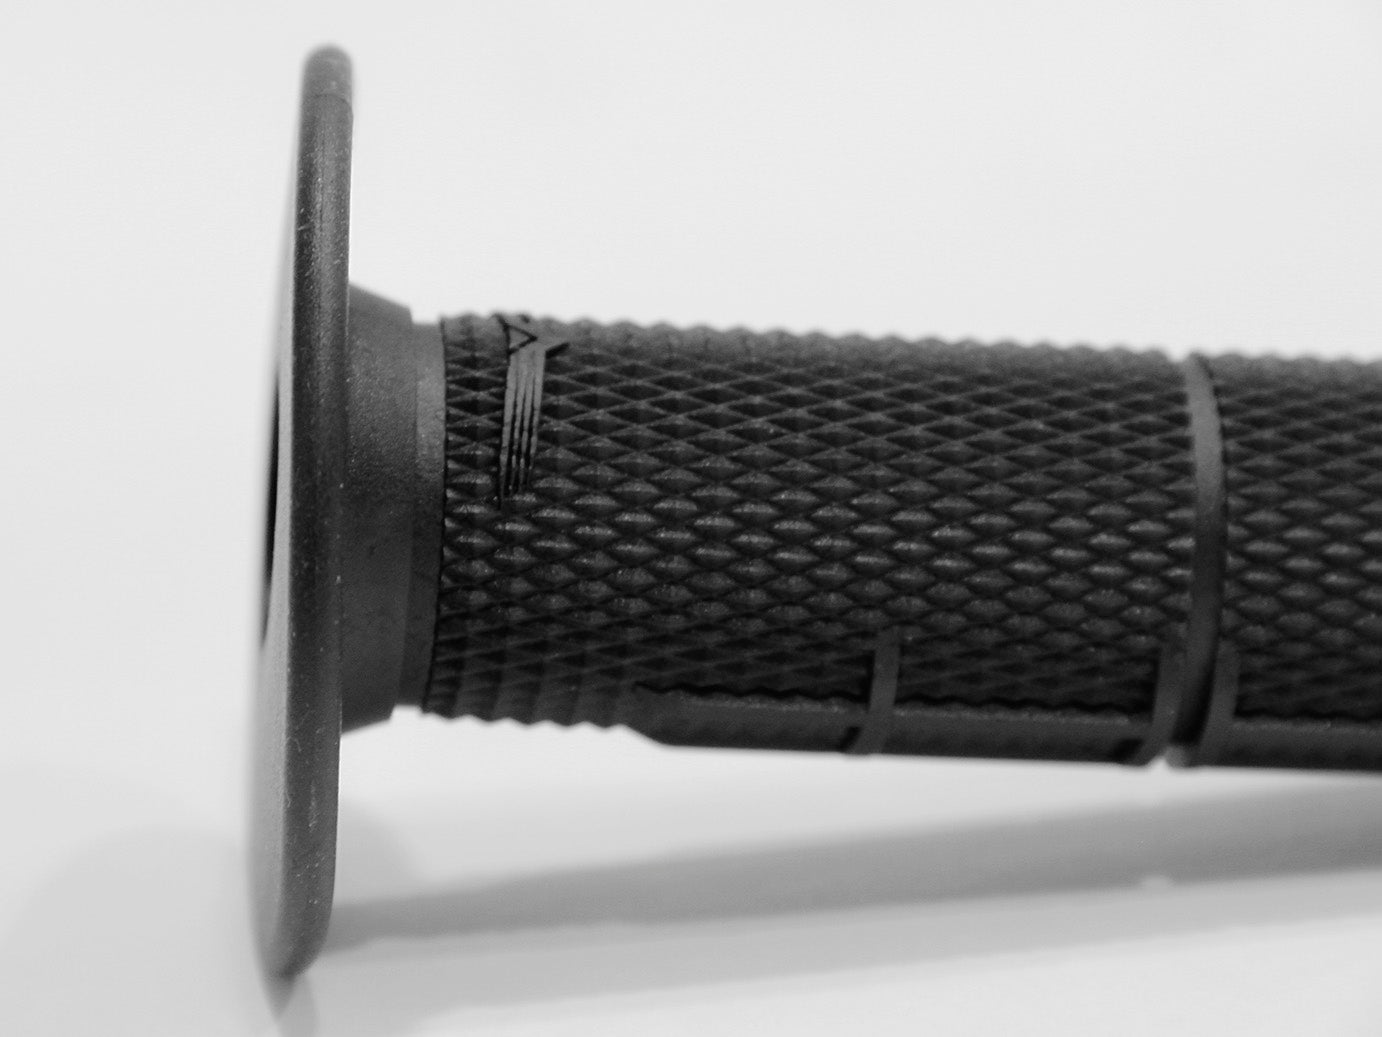 Black Grip showing safety wire grooves